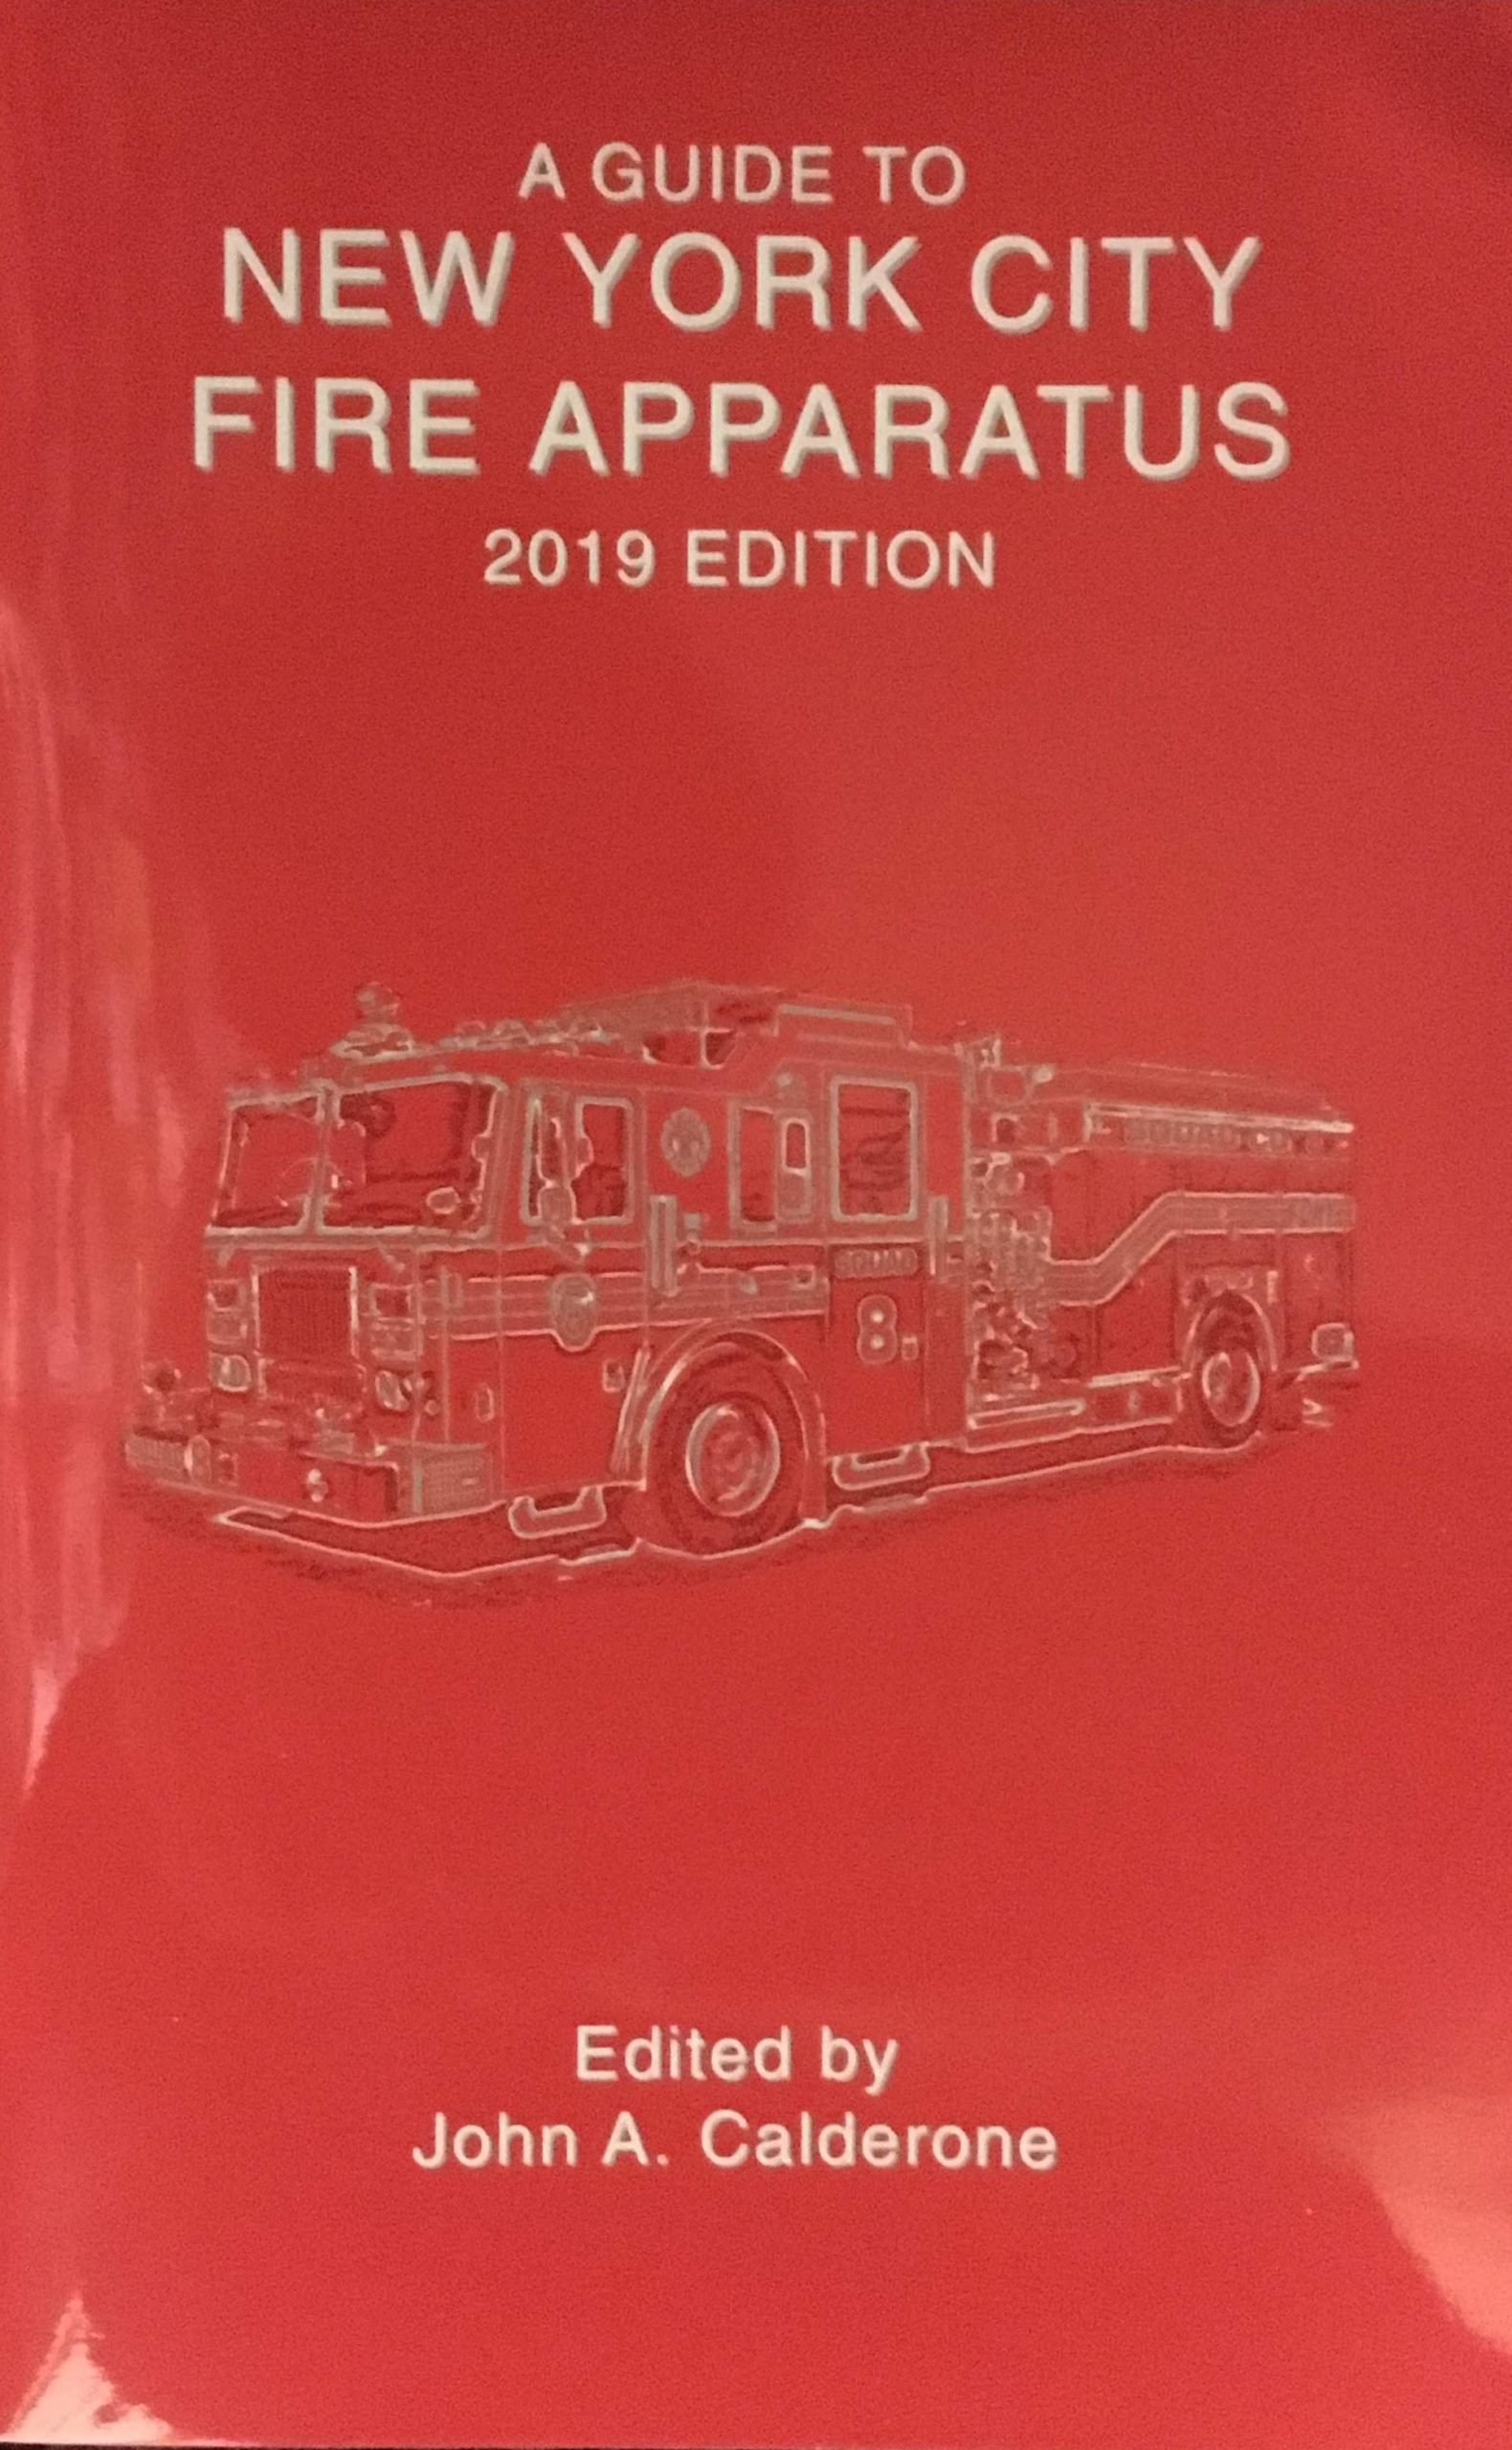 A Guide to New York City Fire Apparatus, 2019